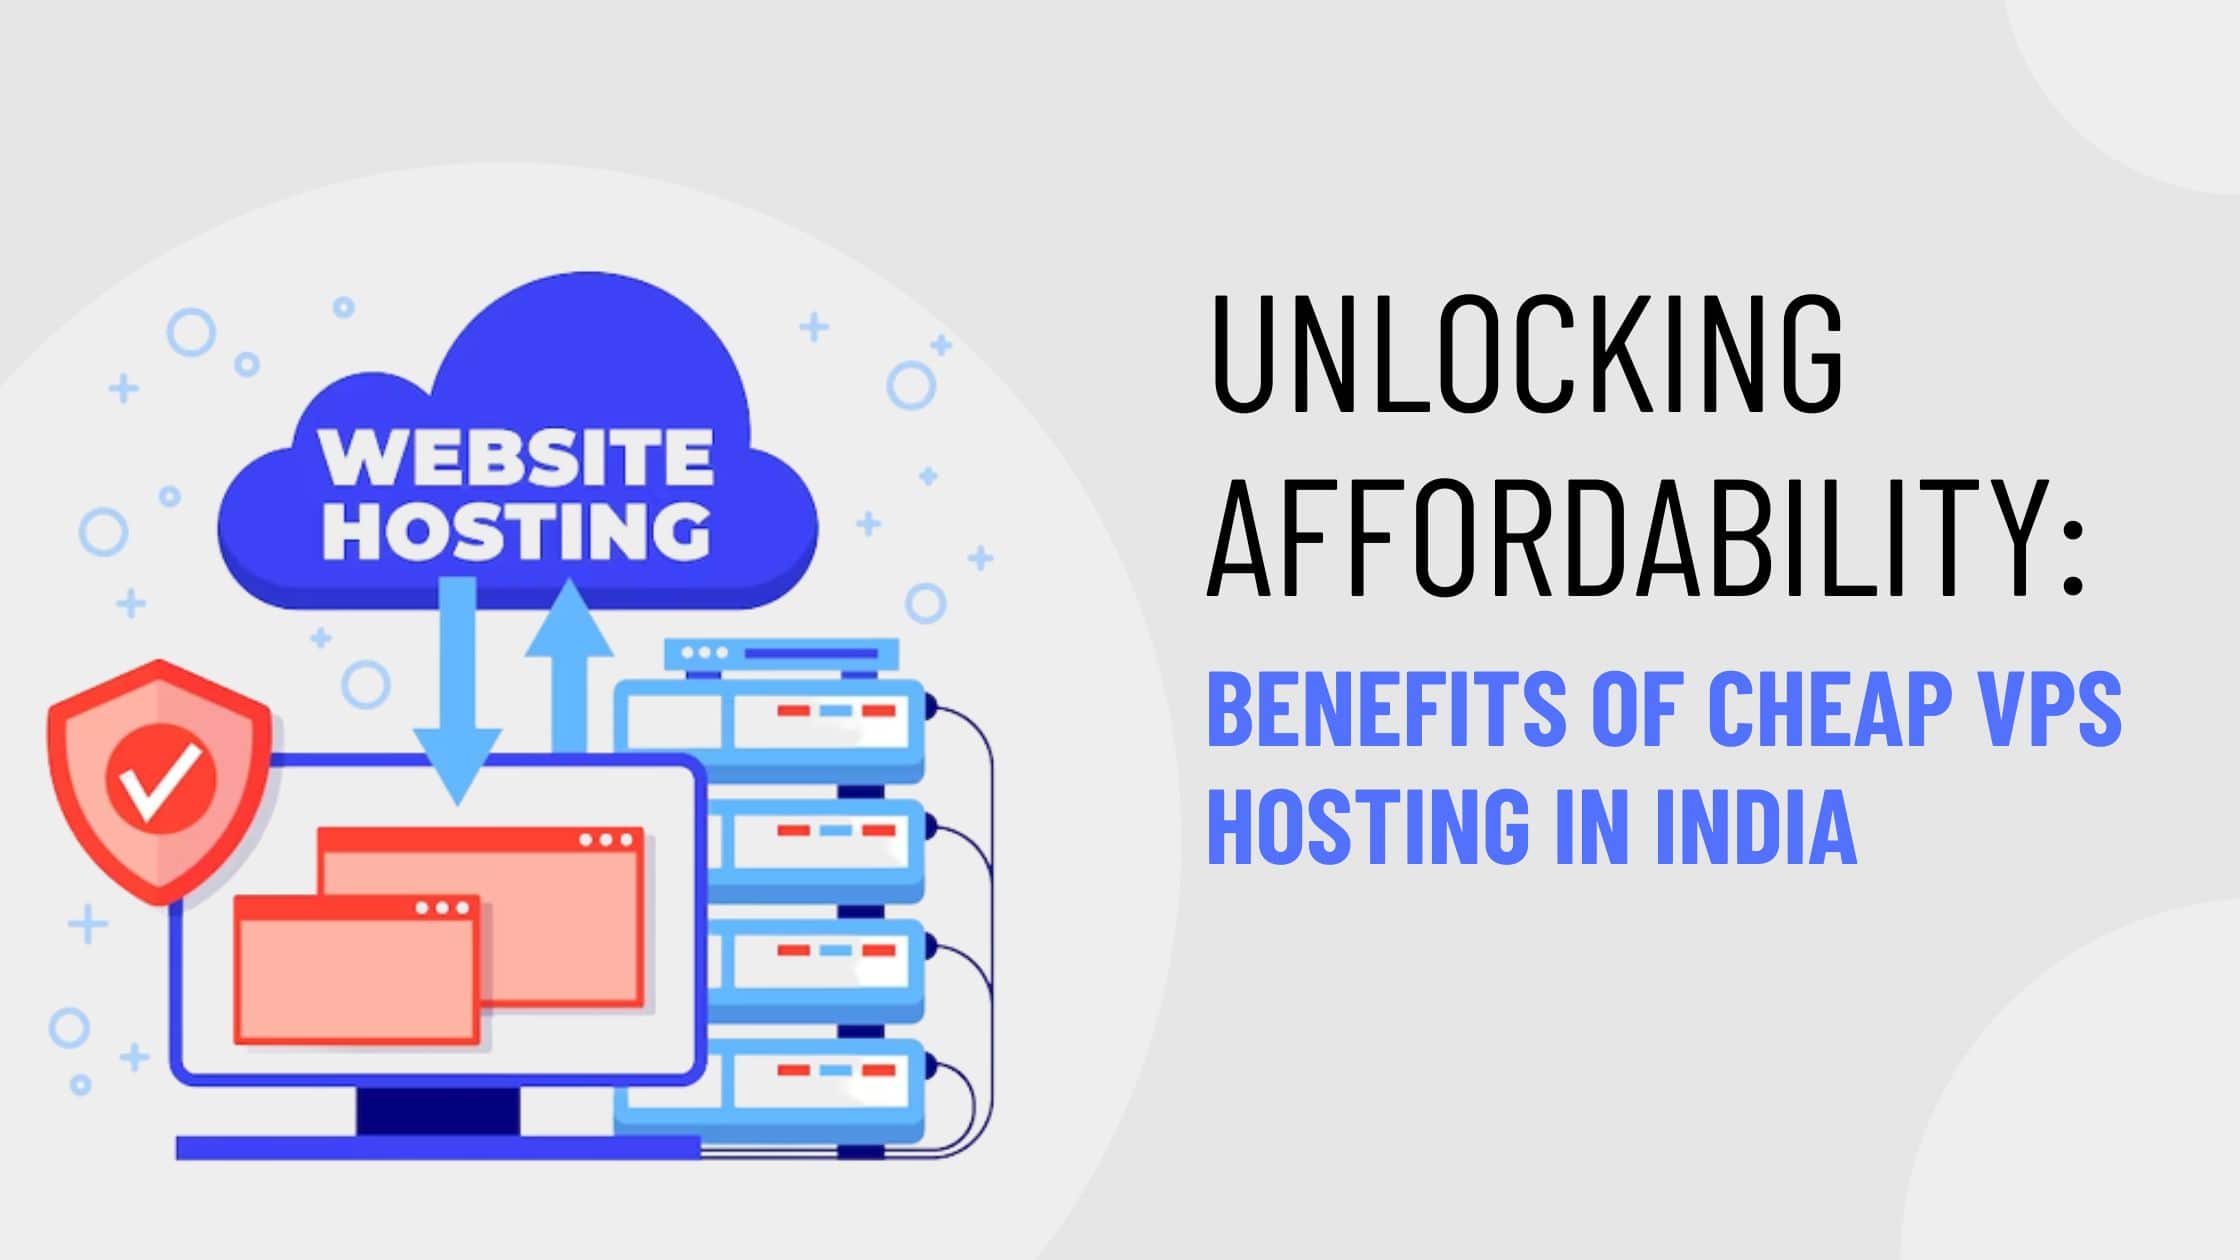 Unlocking Affordability: Benefits of Cheap VPS Hosting in India 